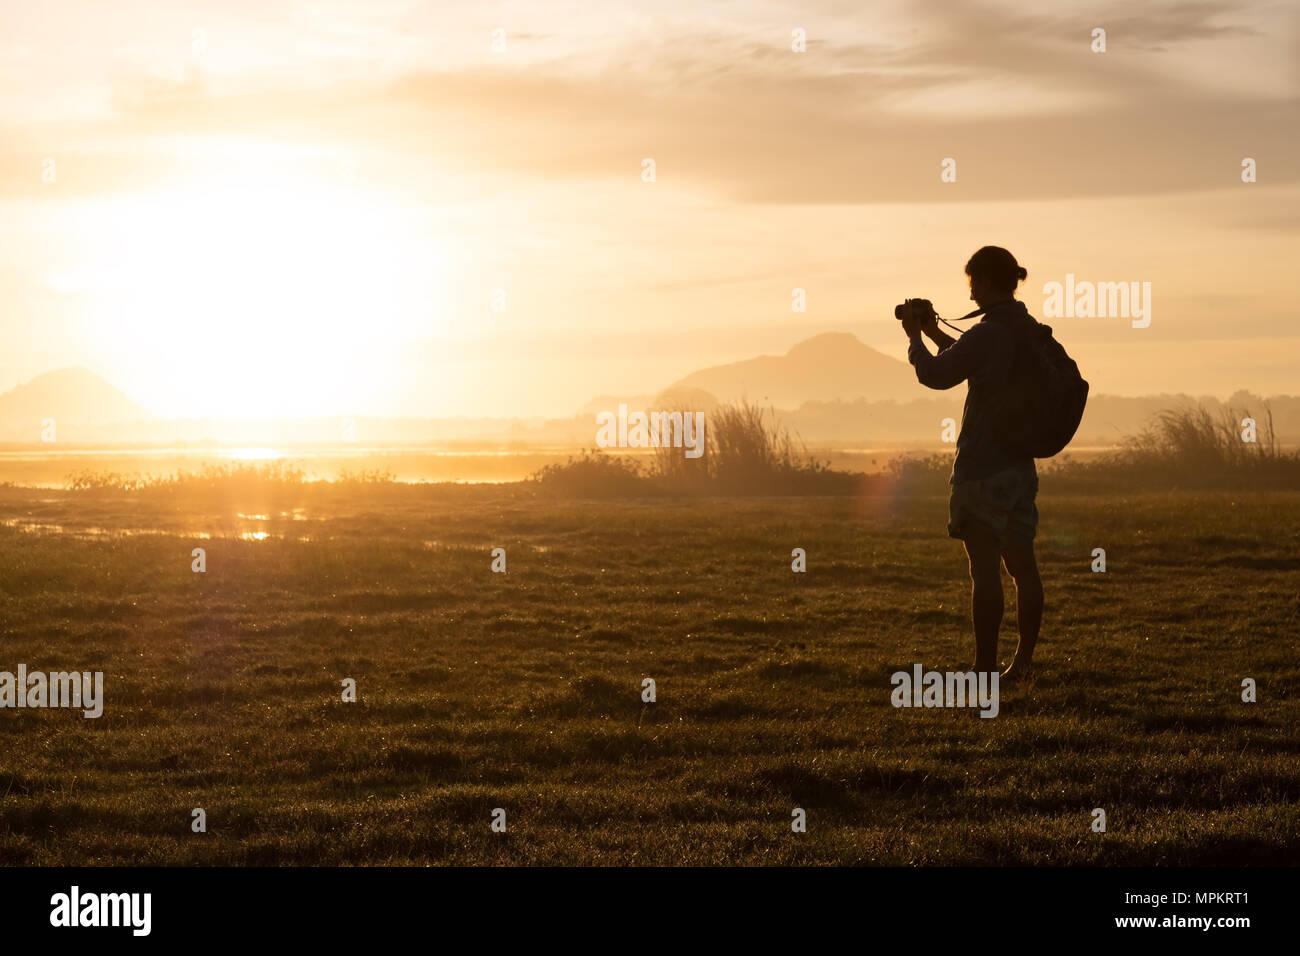 silhouette of a woman holding a smartphone taking pictures outside during sunrise or sunset. Stock Photo